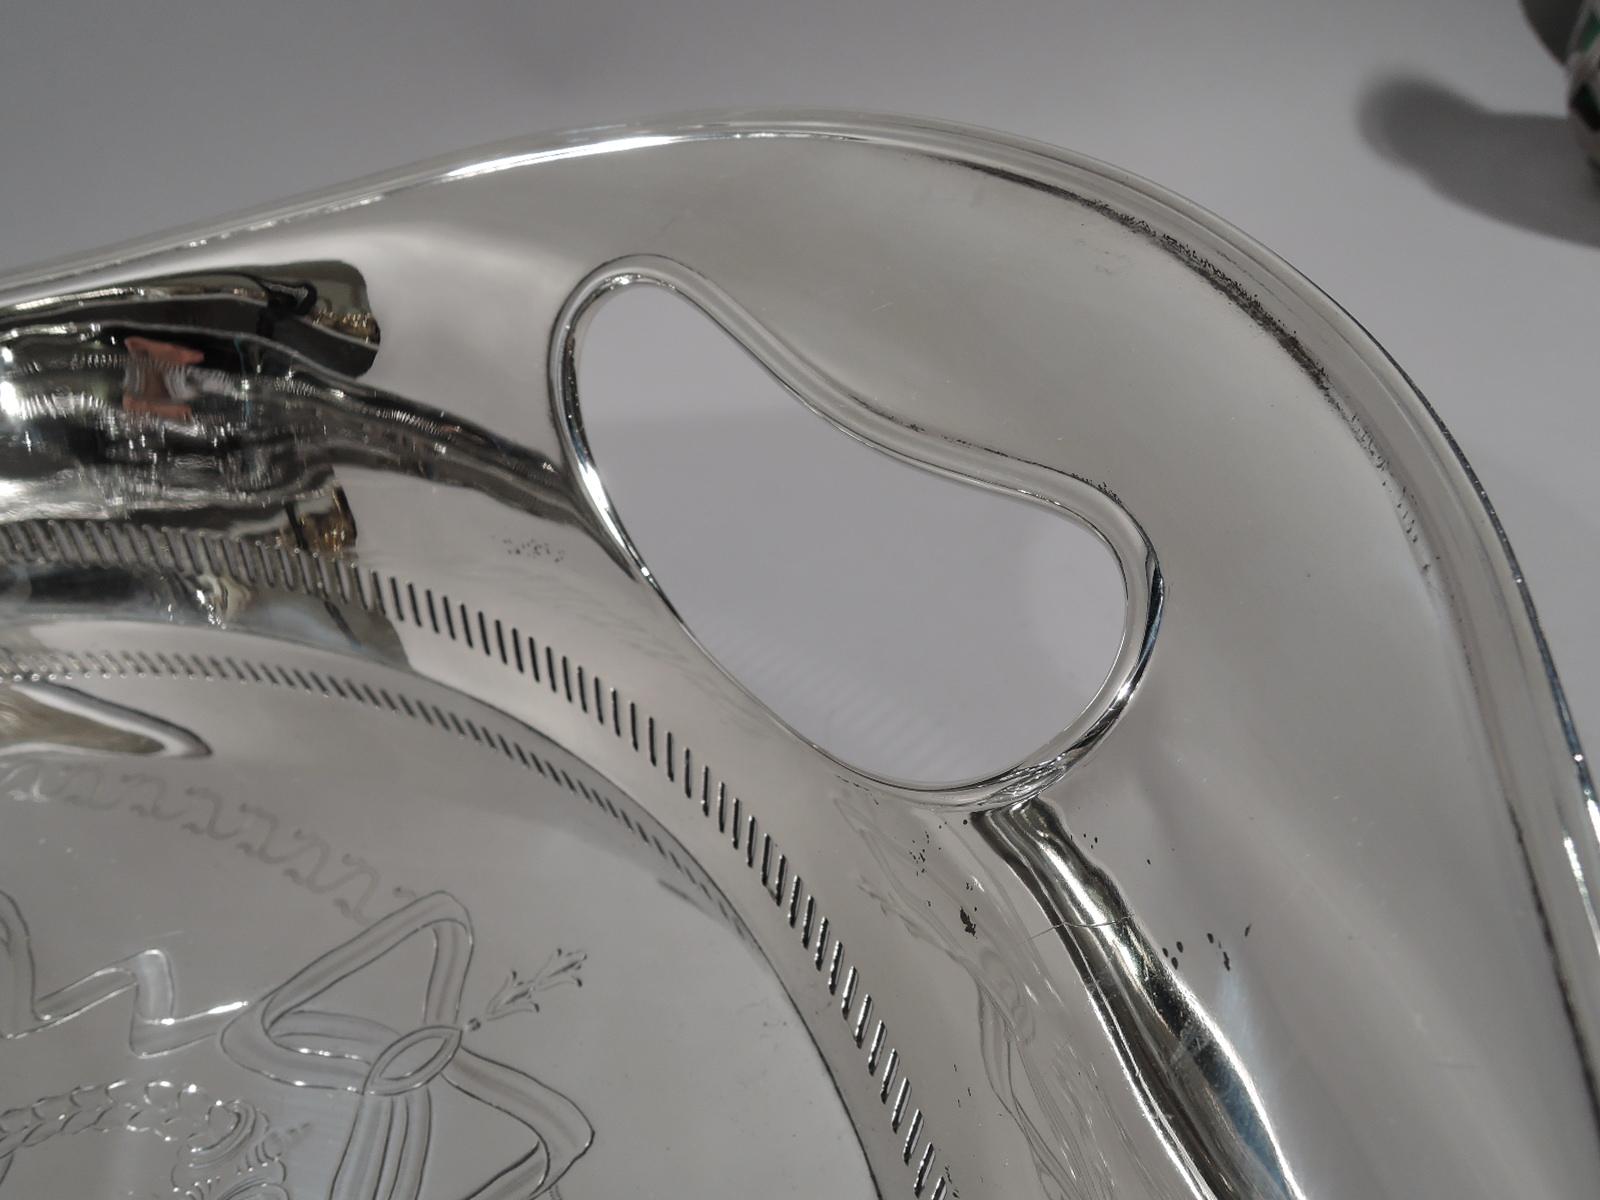 Striking Edwardian sterling silver tea tray. Made by Hawksworth, Eyre & Co., Ltd in Sheffield in 1910. Oval well engraved with bold Regency ornament, ribbon-tied oval frames joined by garlands in Vitruvian scroll border. Sides plain with gallery